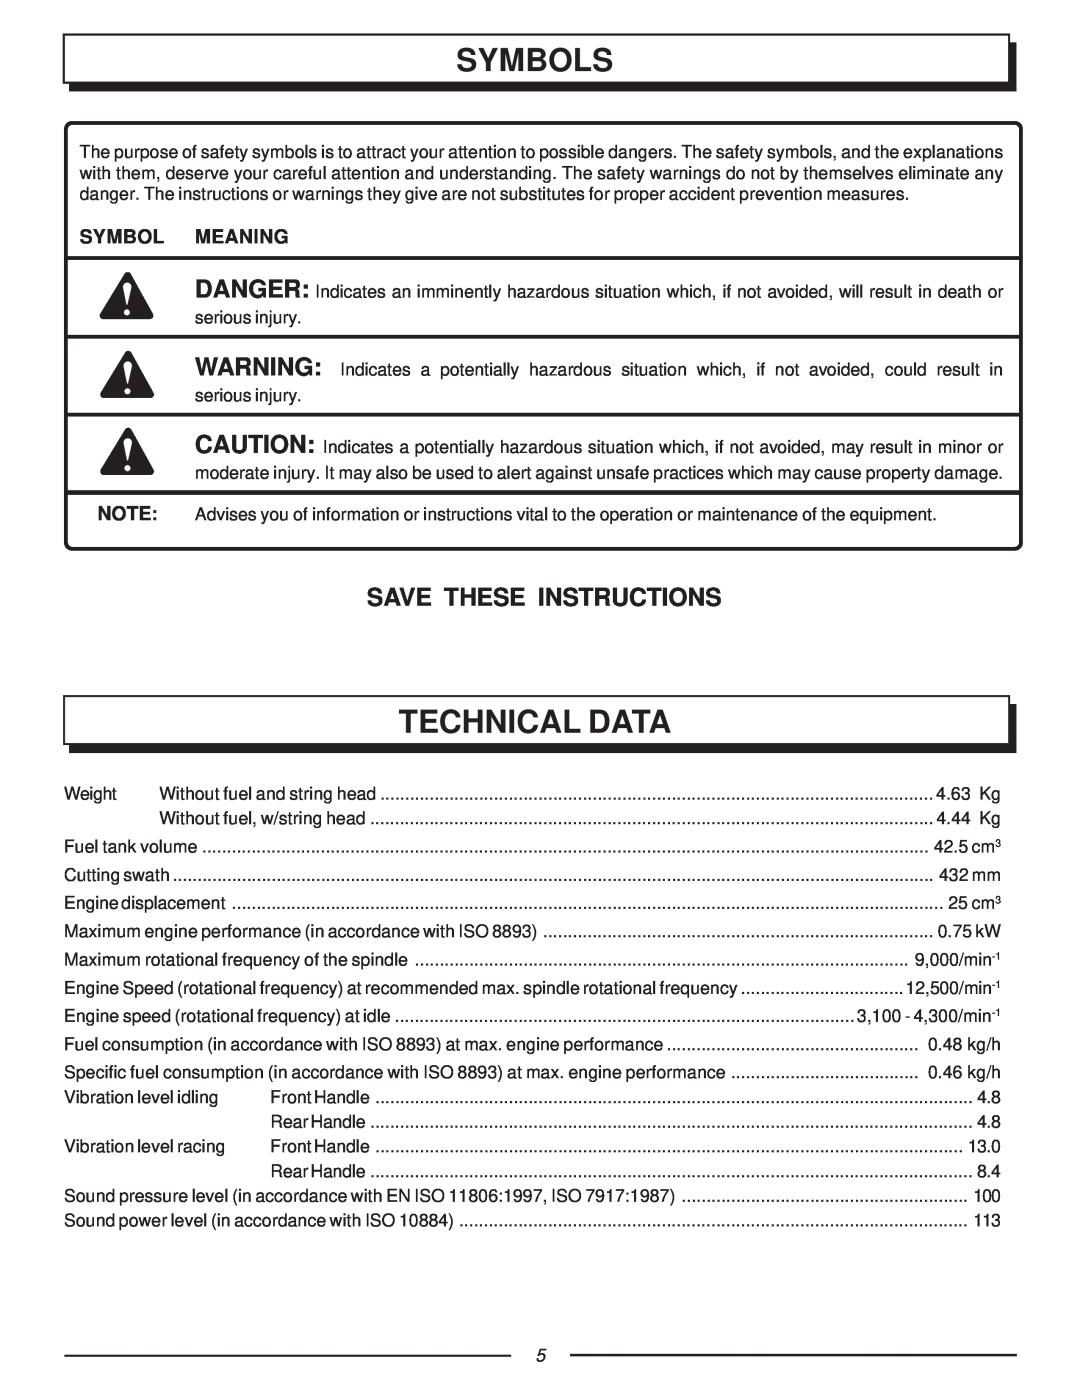 Homelite UT70121, F2020 manual Technical Data, Symbols, Save These Instructions, Symbol Meaning 